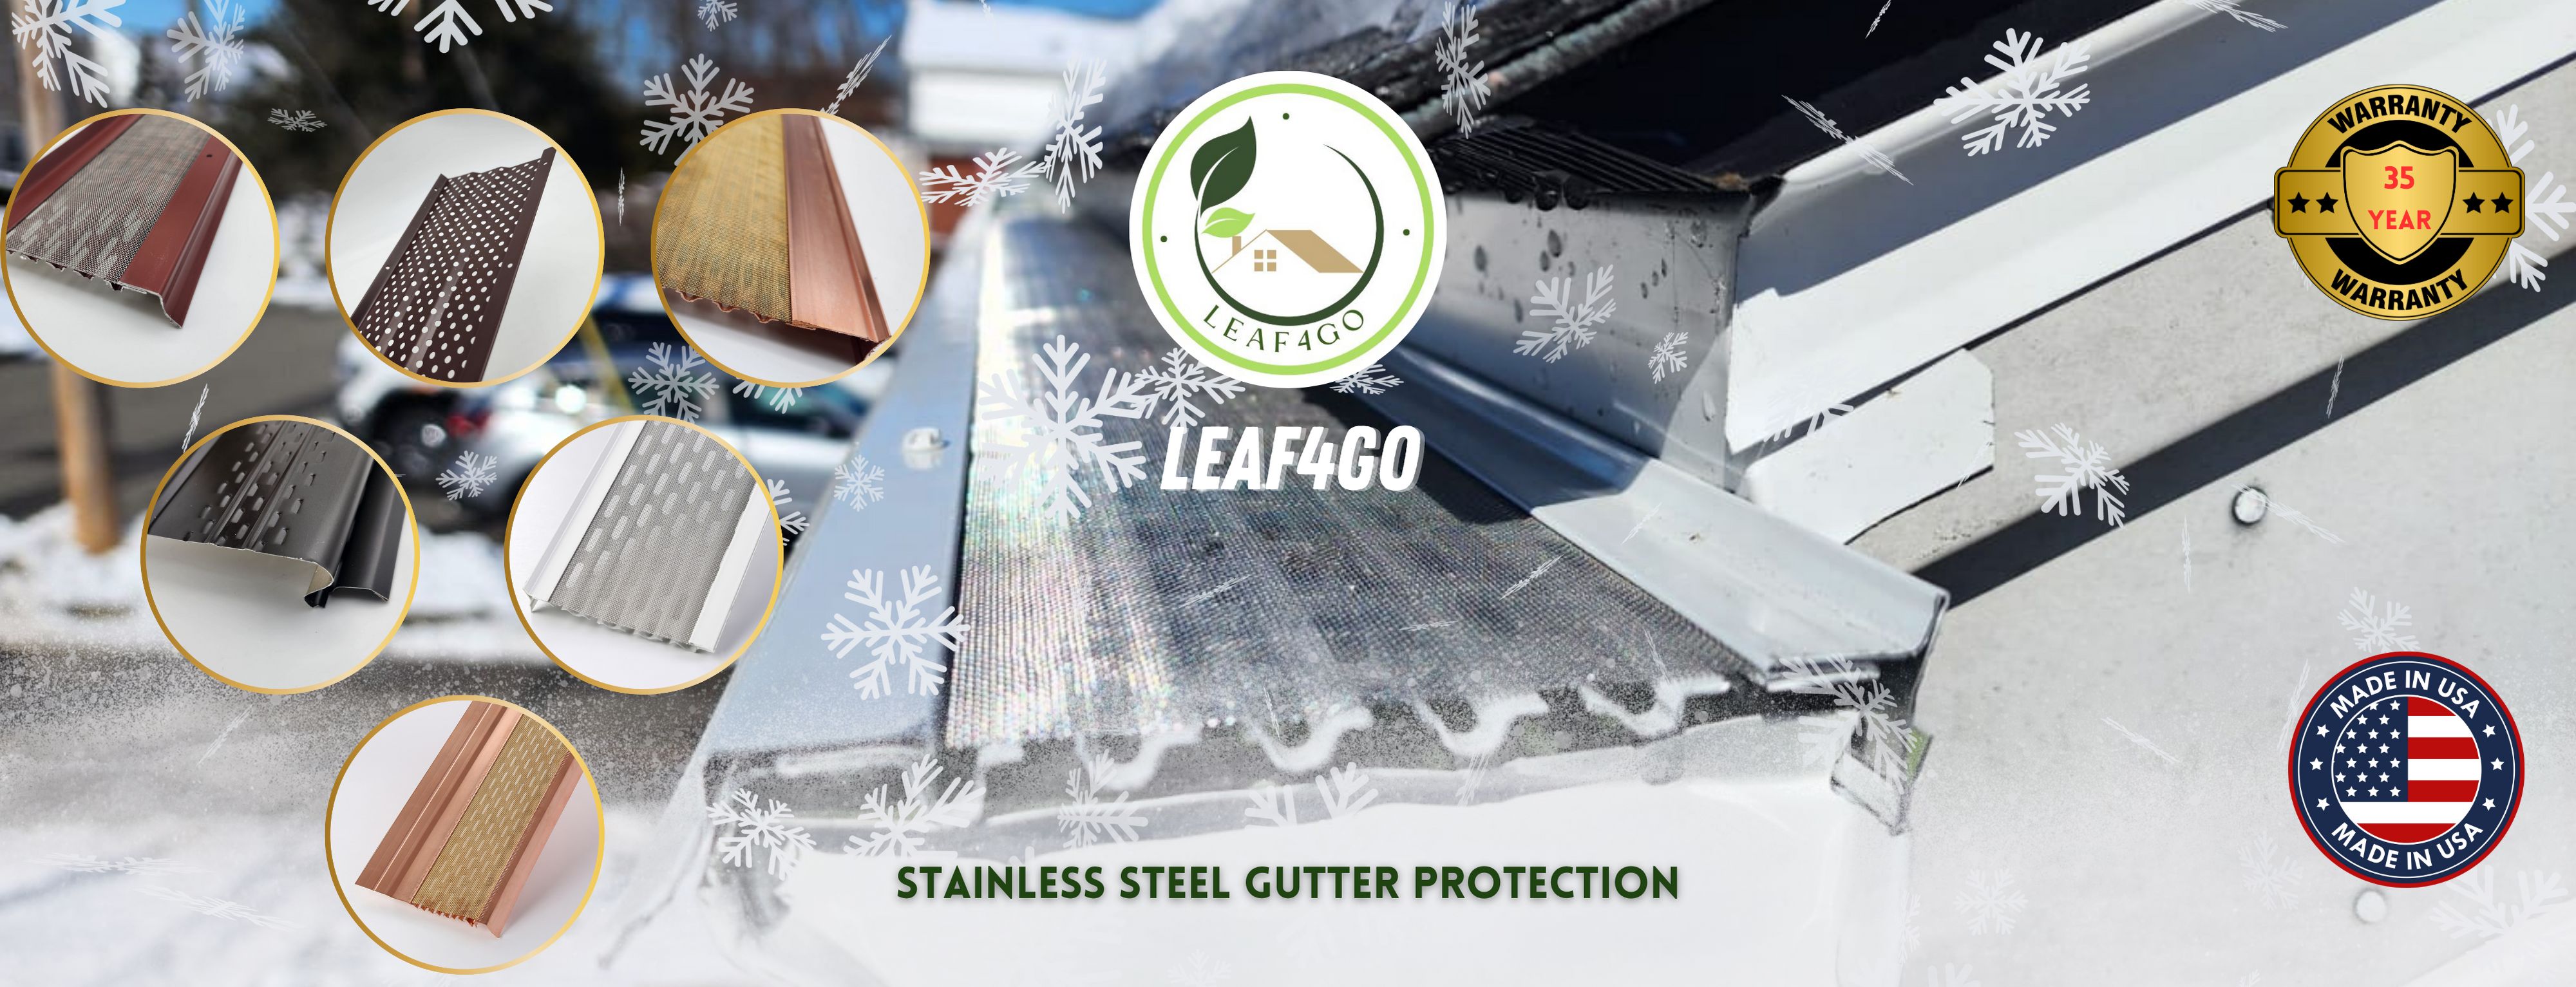 leaf4go stainless steel gutter protection,made in usa warranty 35 year warranty